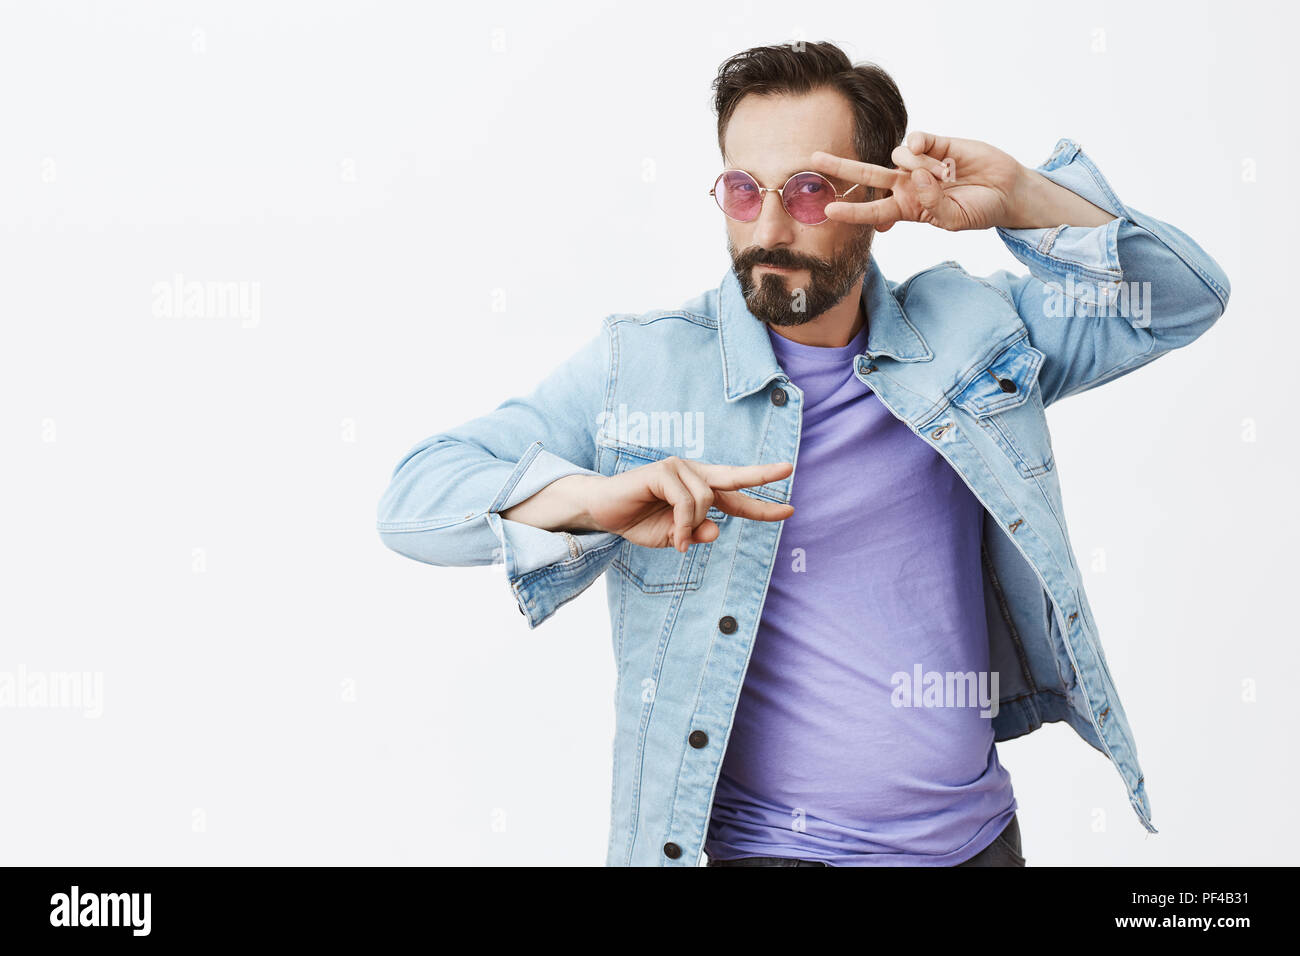 Let us lit this dancefloor. Charming flirty and emotional good-looking male in denim jacket and stylish sunglasses, dancing and making disco gesture or peace signs over eyes, looking at camera Stock Photo